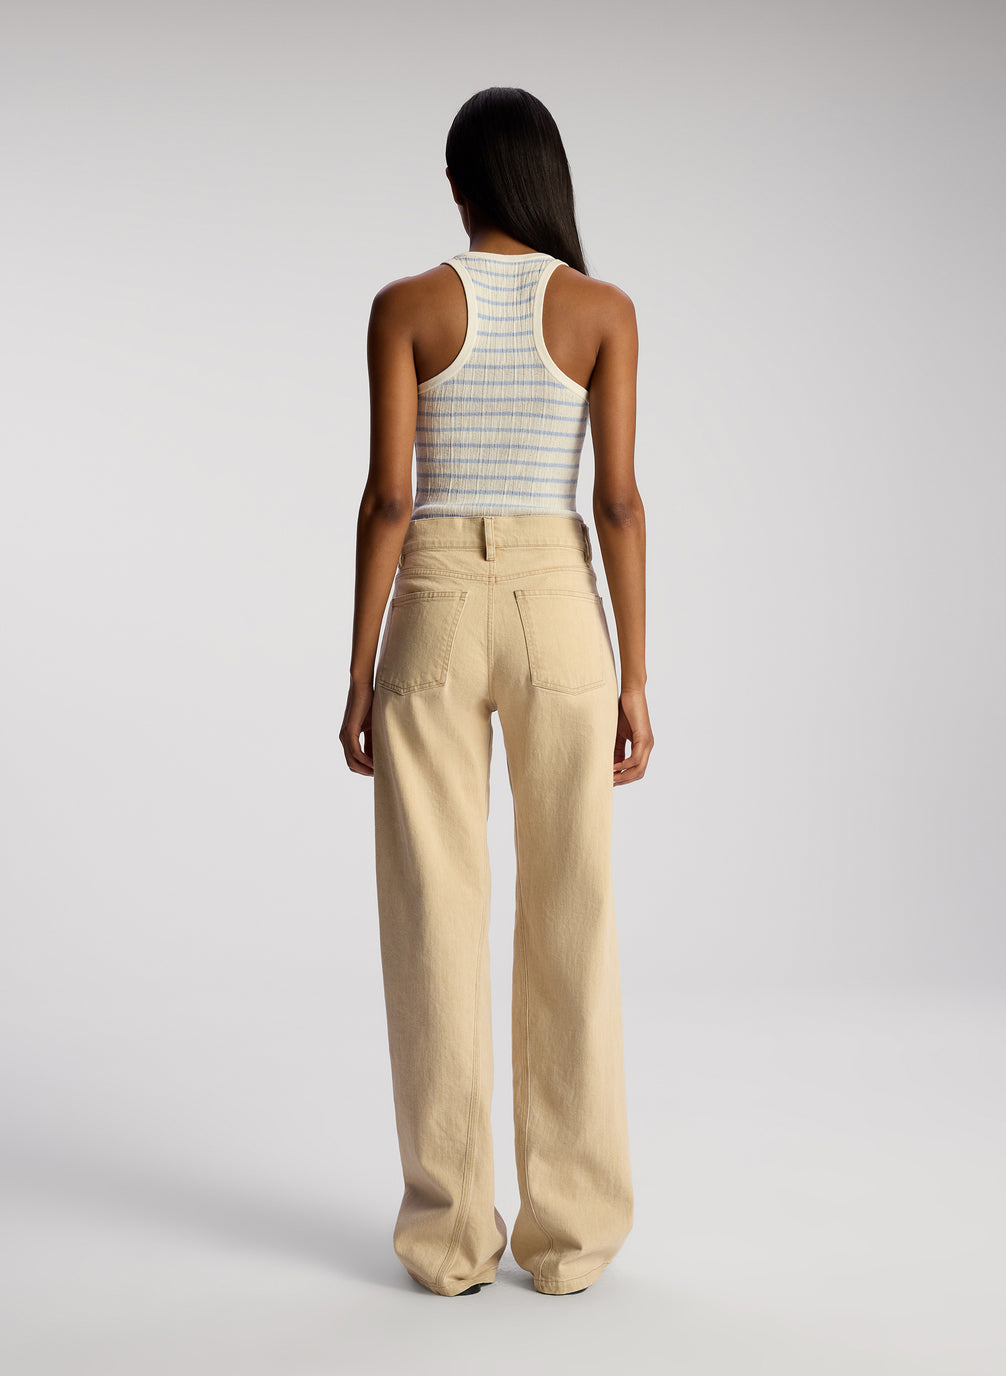 back view of woman wearing light blue and white striped tank top and tan pants